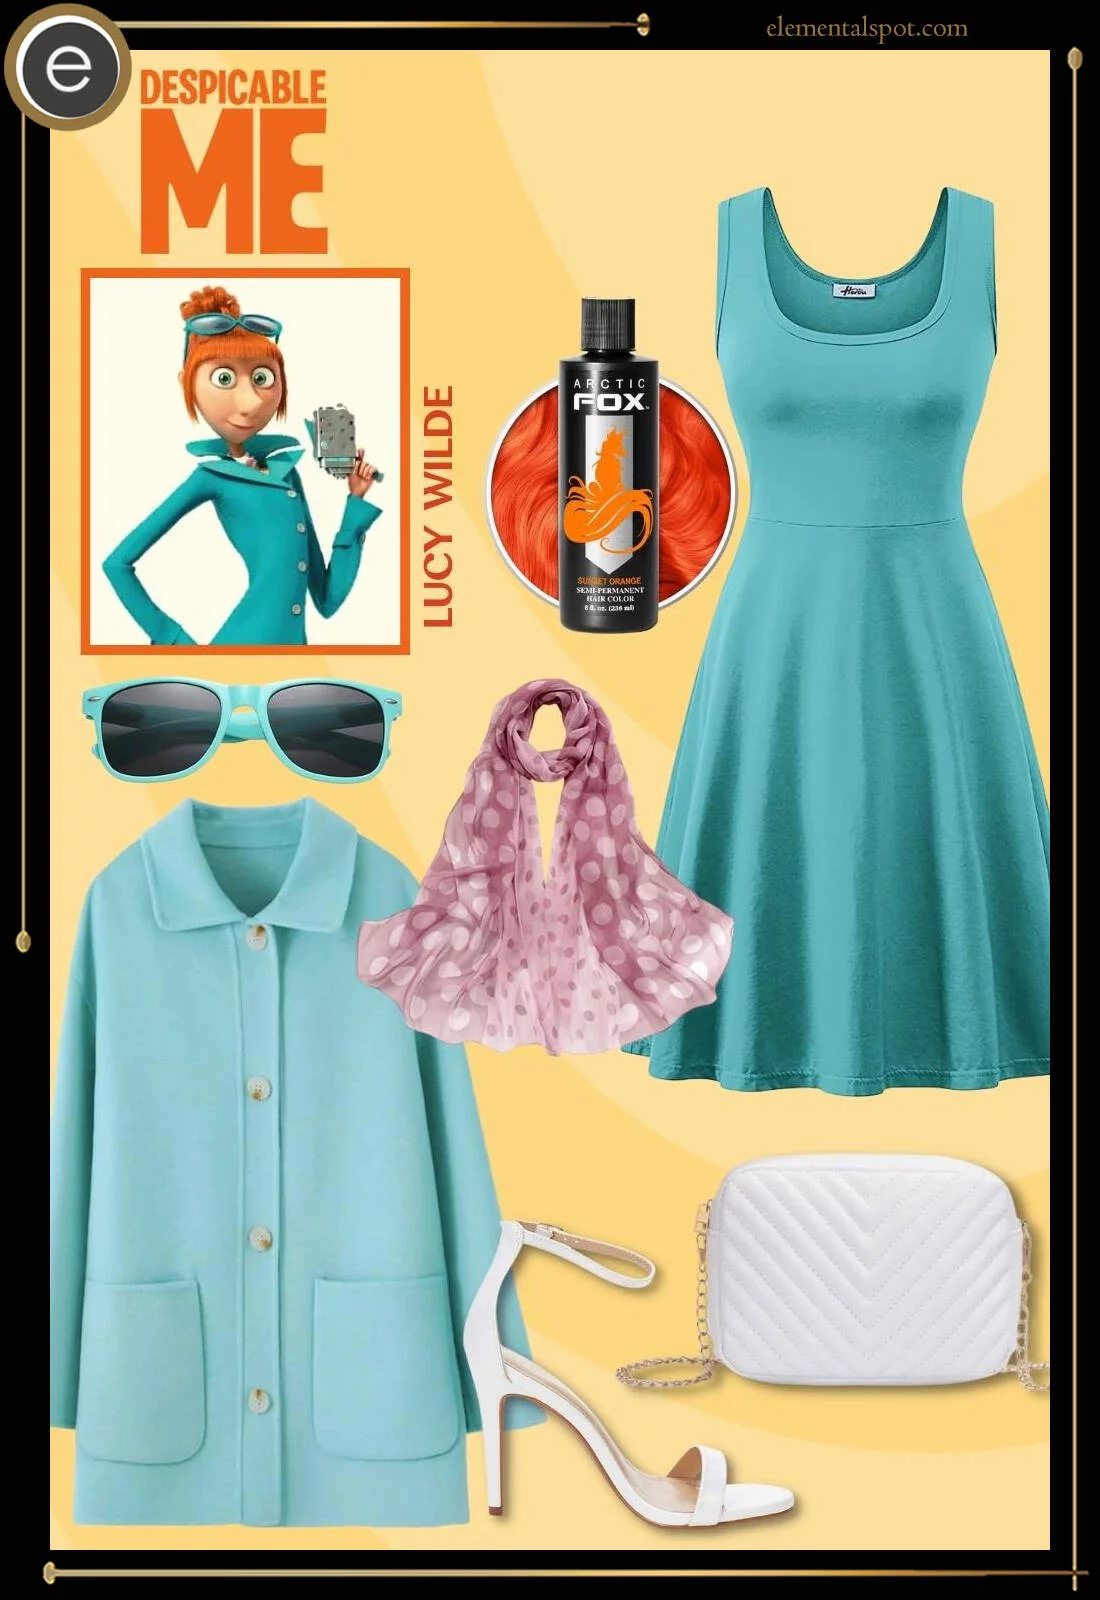 Dress Up Like Lucy Wilde from Despicable Me - Elemental Spot